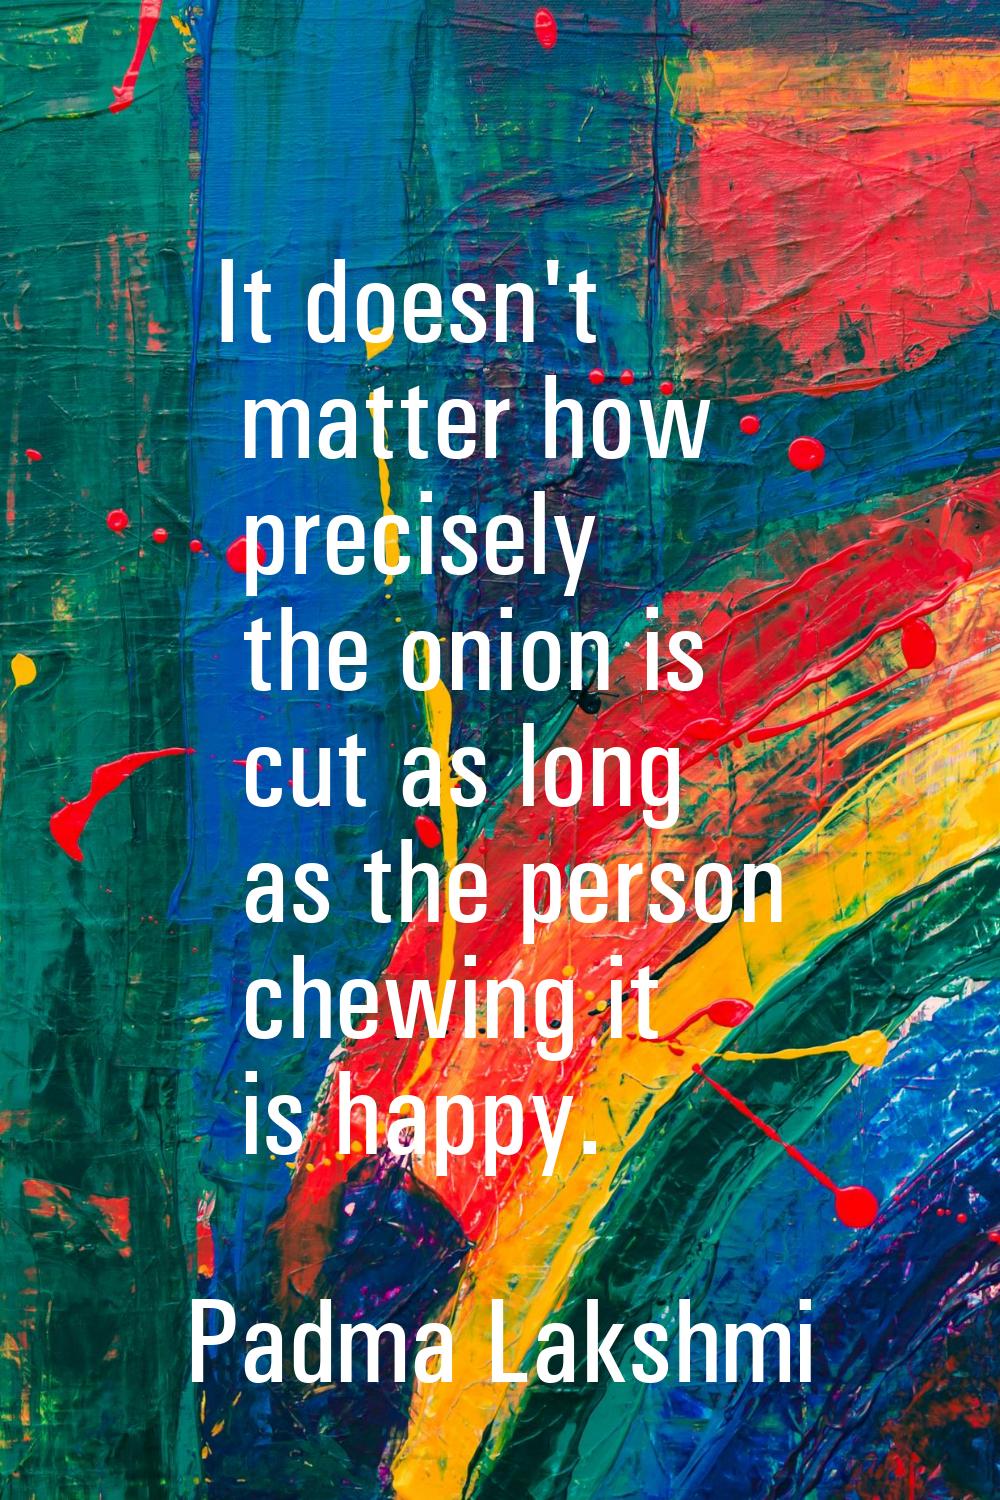 It doesn't matter how precisely the onion is cut as long as the person chewing it is happy.